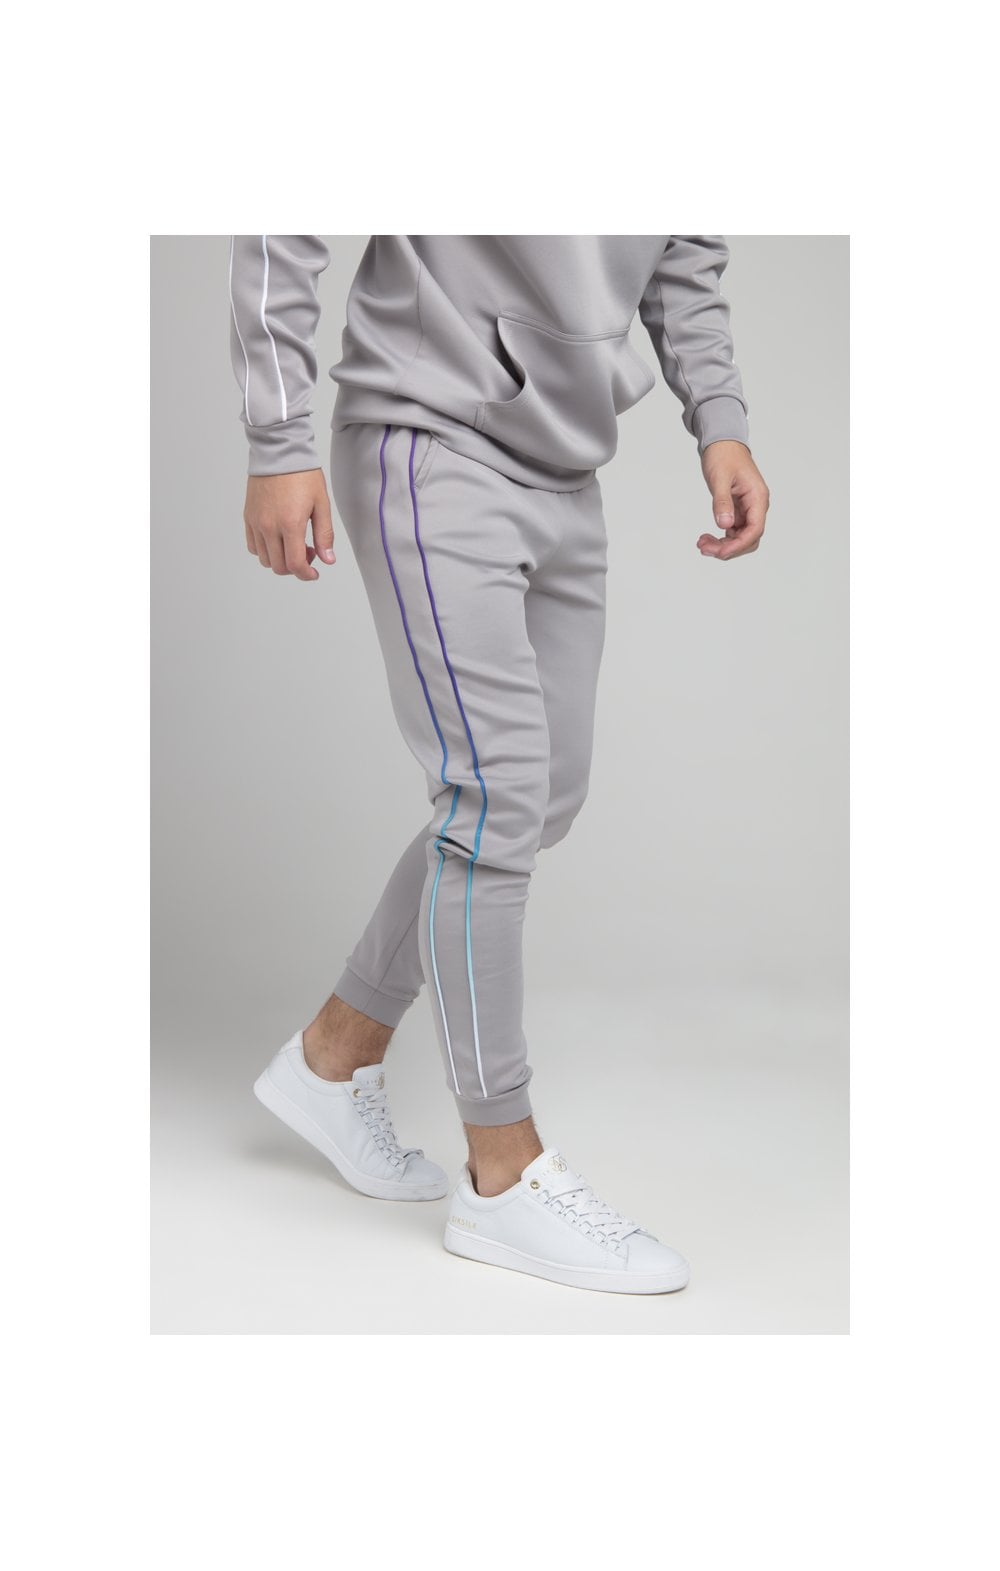 Load image into Gallery viewer, Illusive London Poly Piped Pants - Light Grey (1)